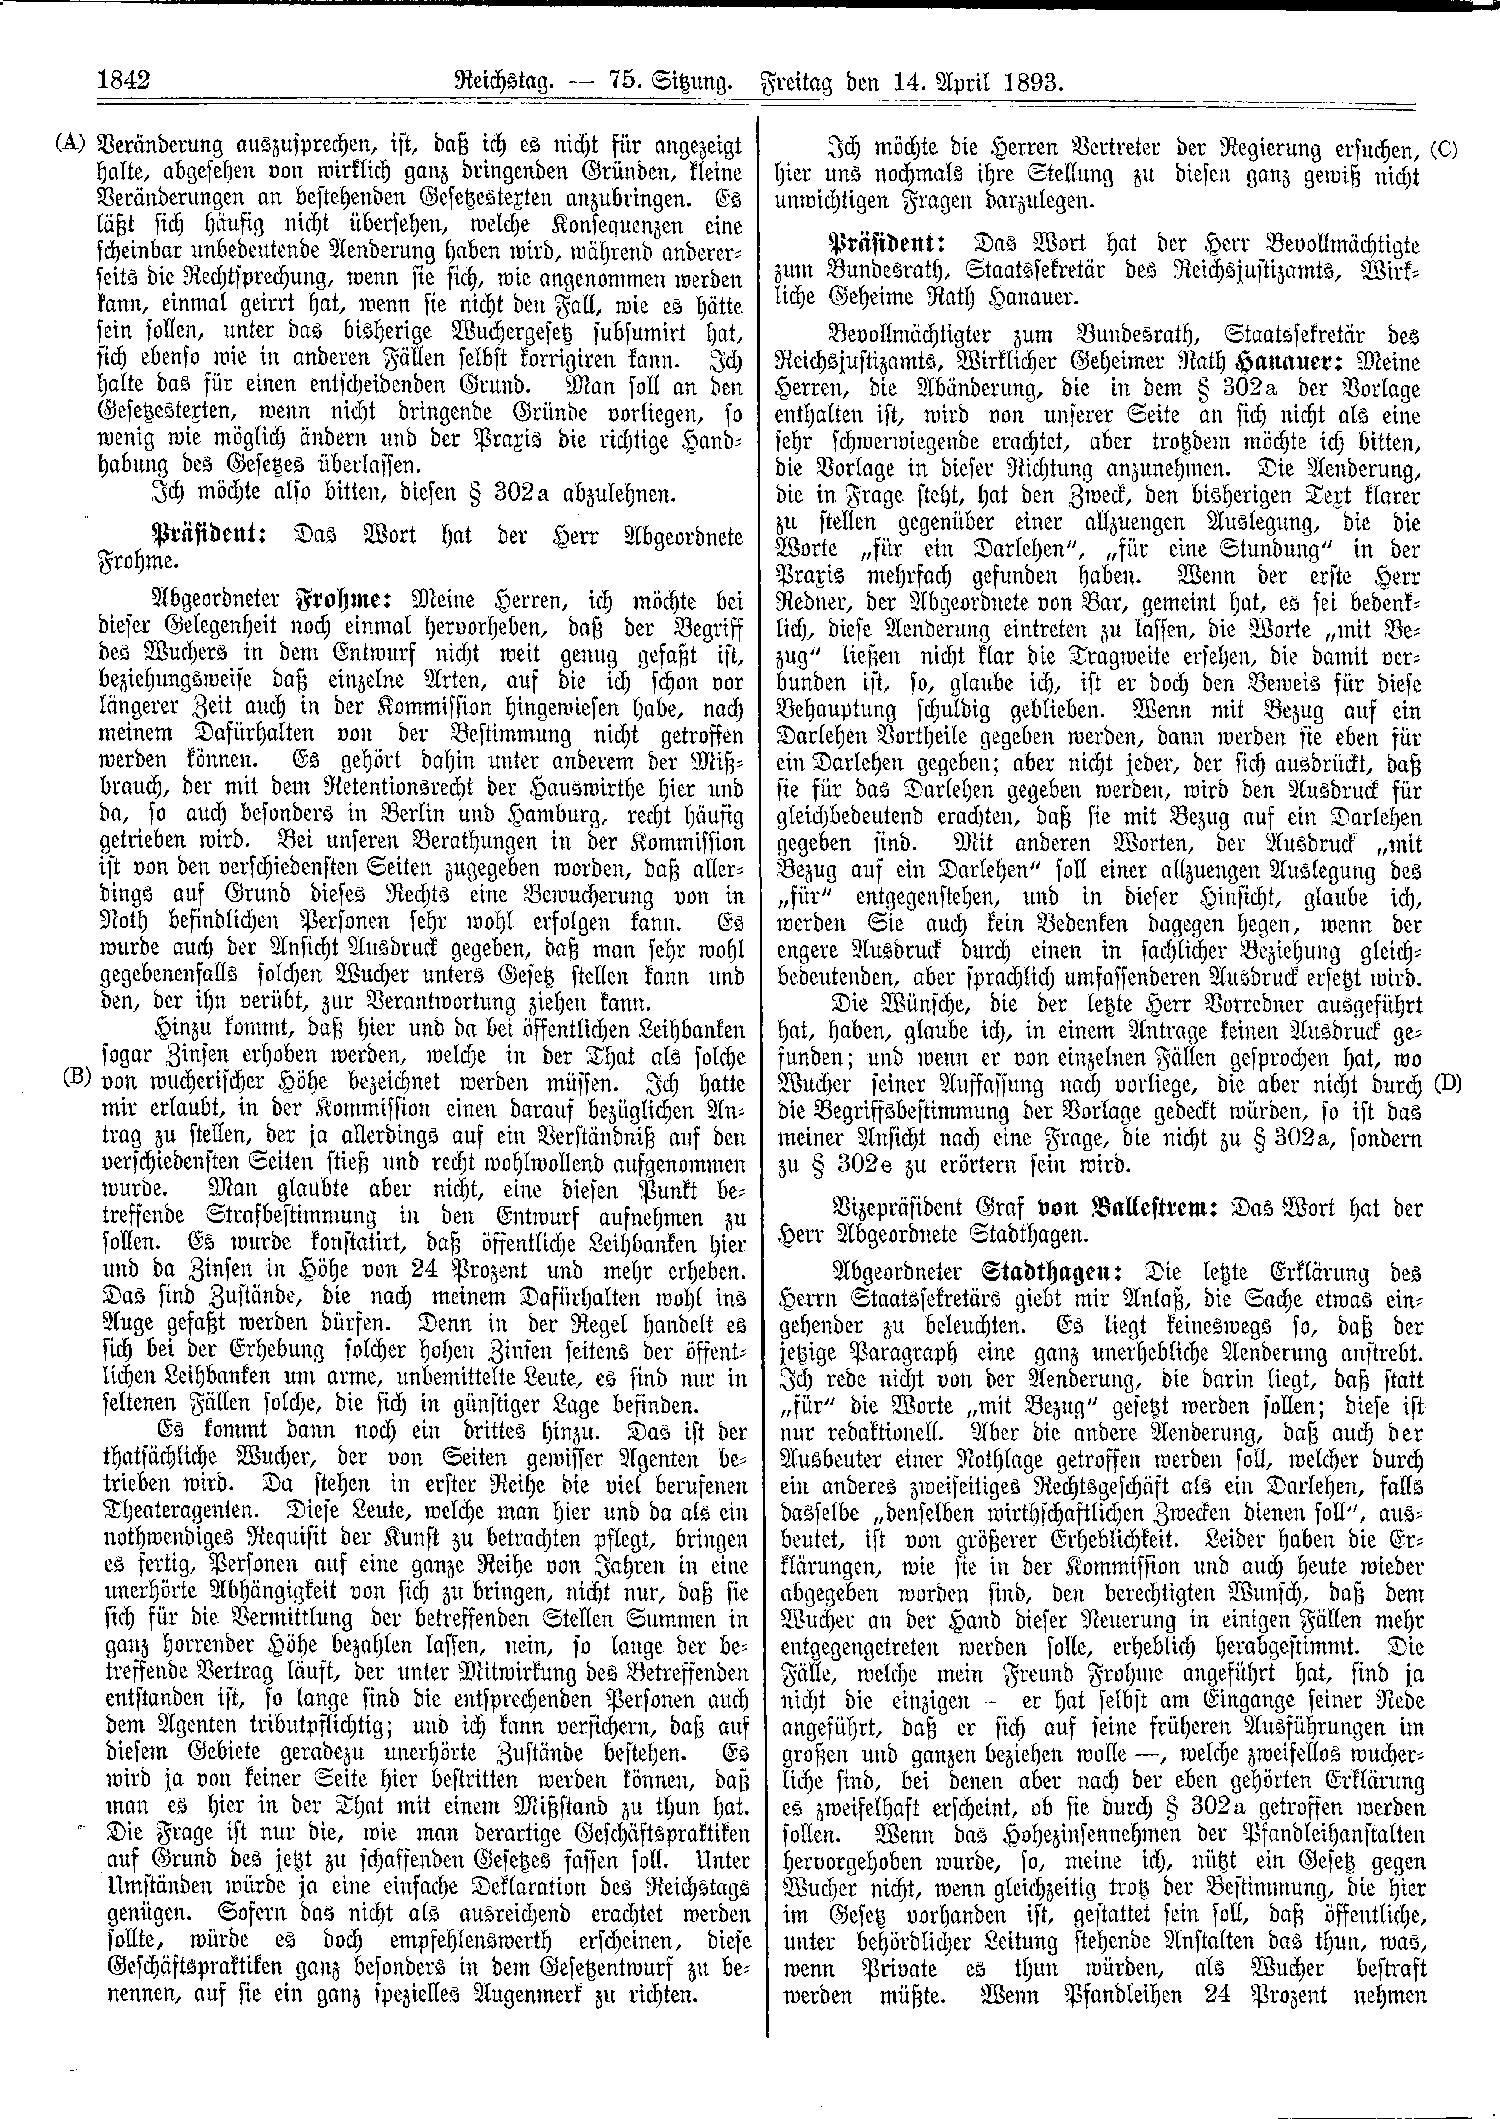 Scan of page 1842